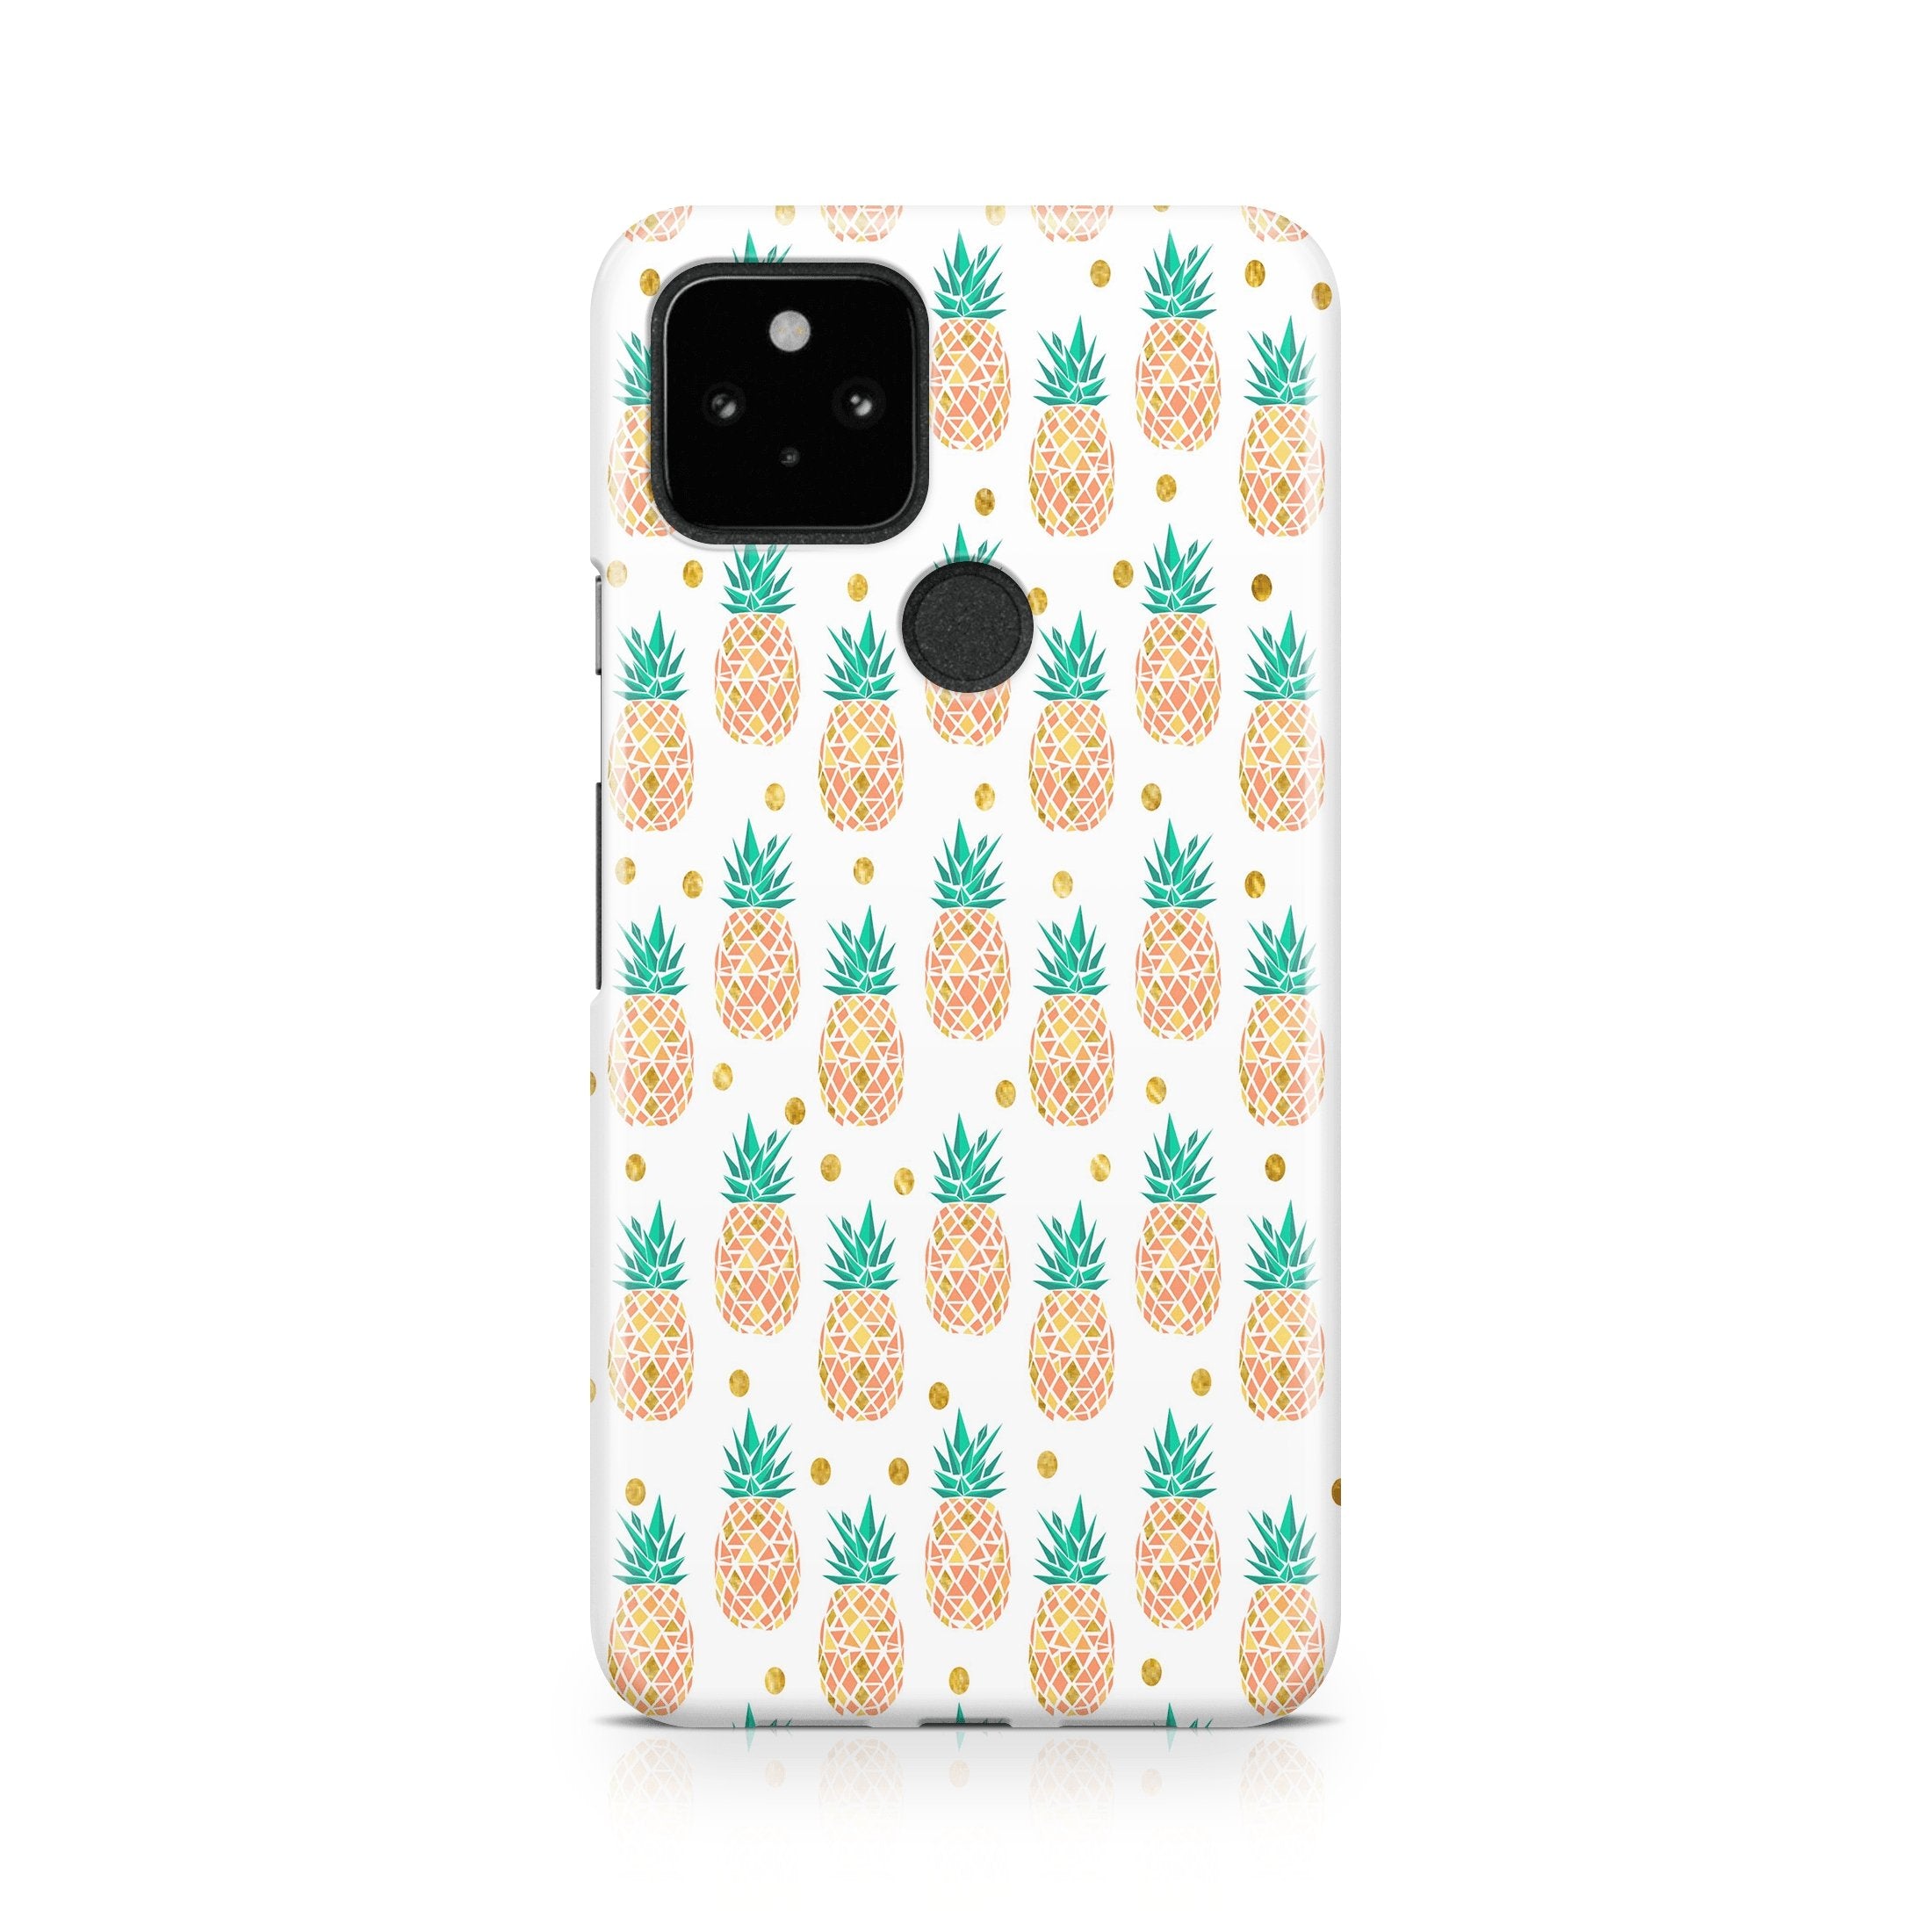 Pineapple Pineapple - Google phone case designs by CaseSwagger